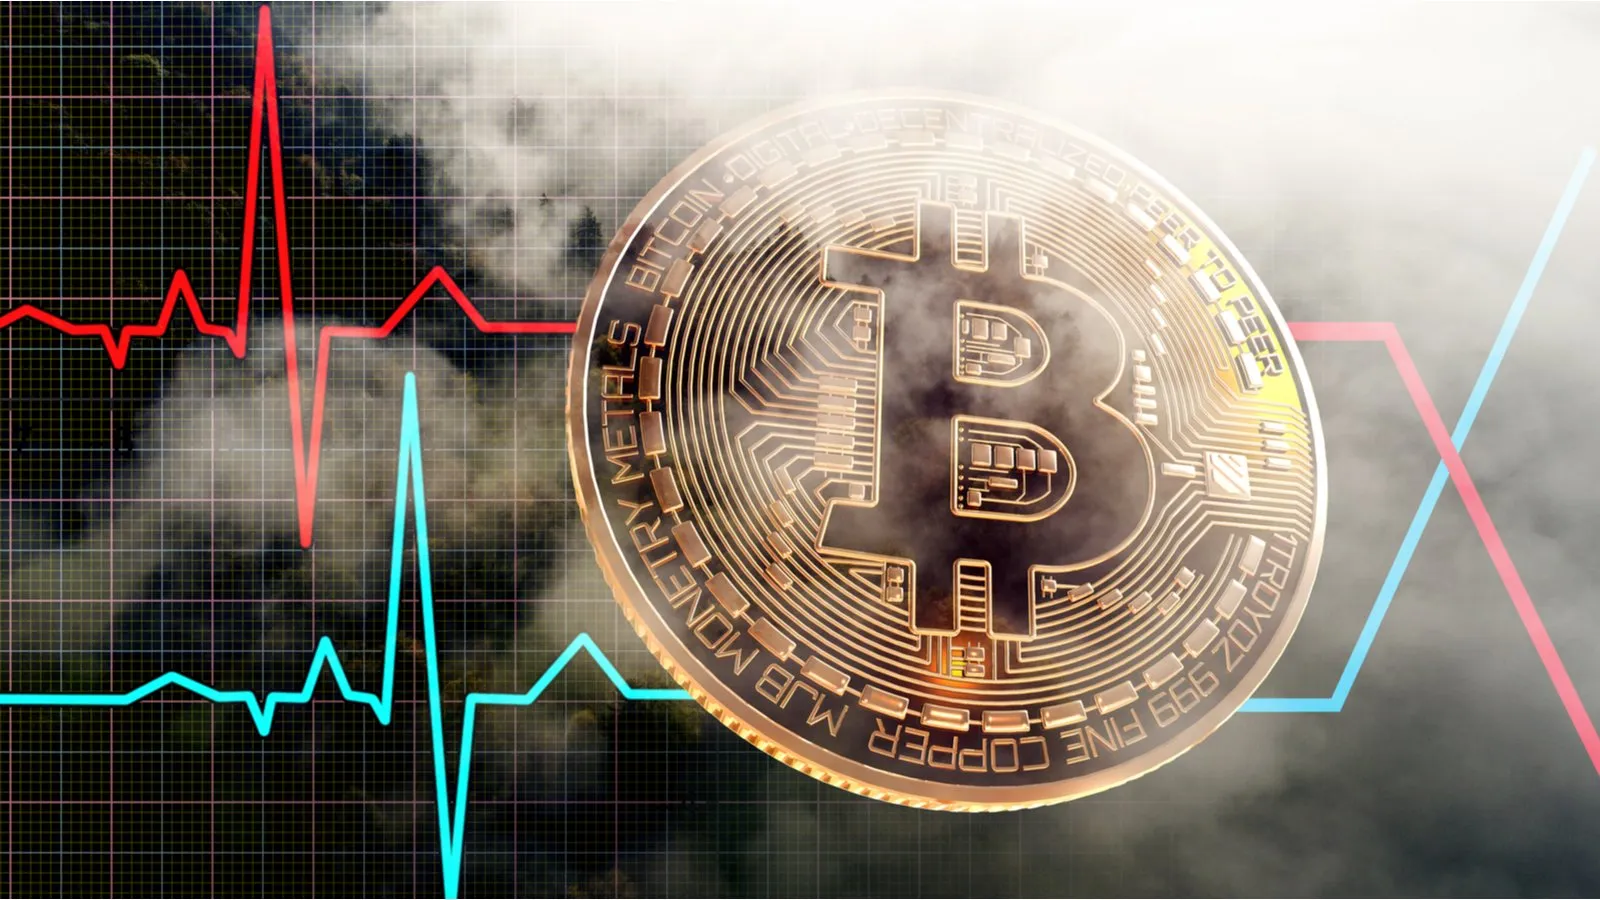 Volatility has always been a Bitcoin characteristic. Image: Shutterstock.